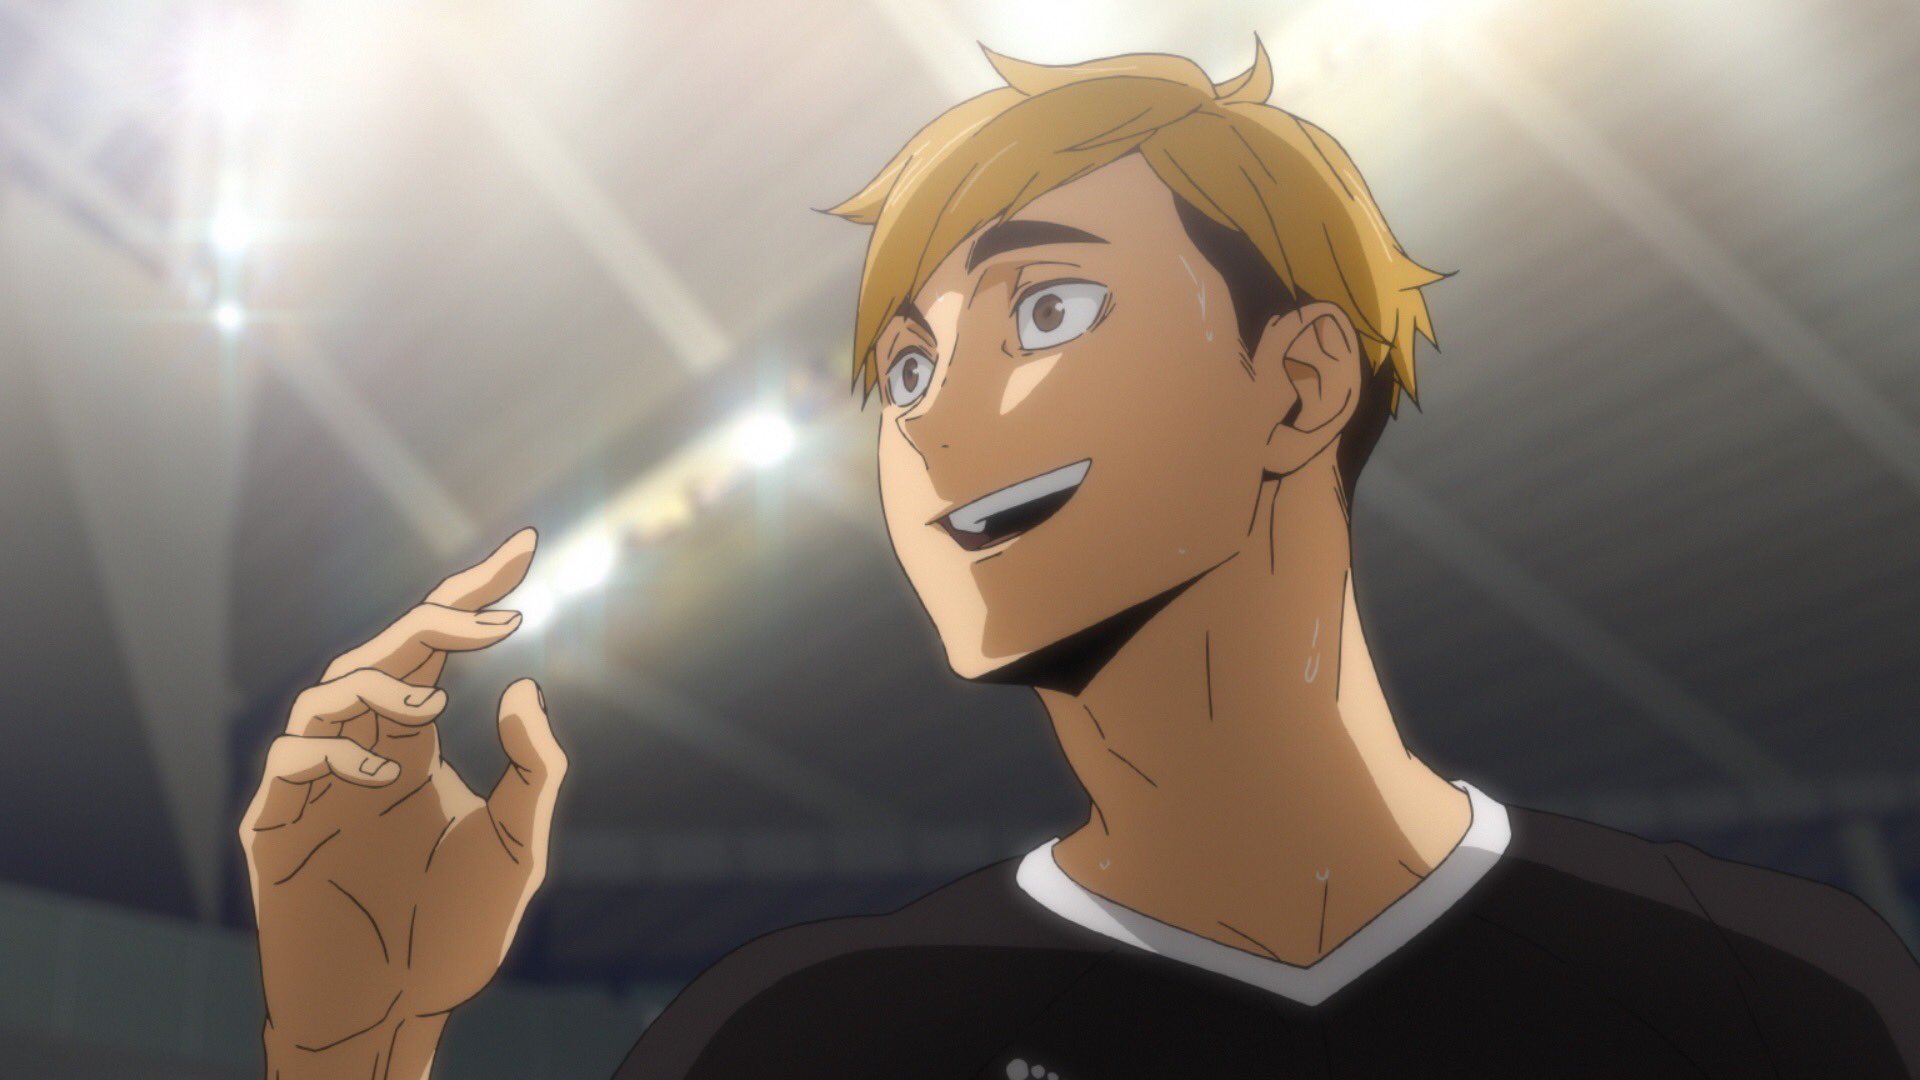 HAIKYU!! on Twitter: 'Haikyu!! Season 4 (Haikyu!! TO THE TOP) Episode 14  'Rhythm' is officially out now in English Subtitles on @Crunchyroll! #ハイキュー  #hq_anime 🏐📺 Watch at: https://t.co/YjfhYZIGSJ https://t.co/NViOy2bYhR' /  Twitter